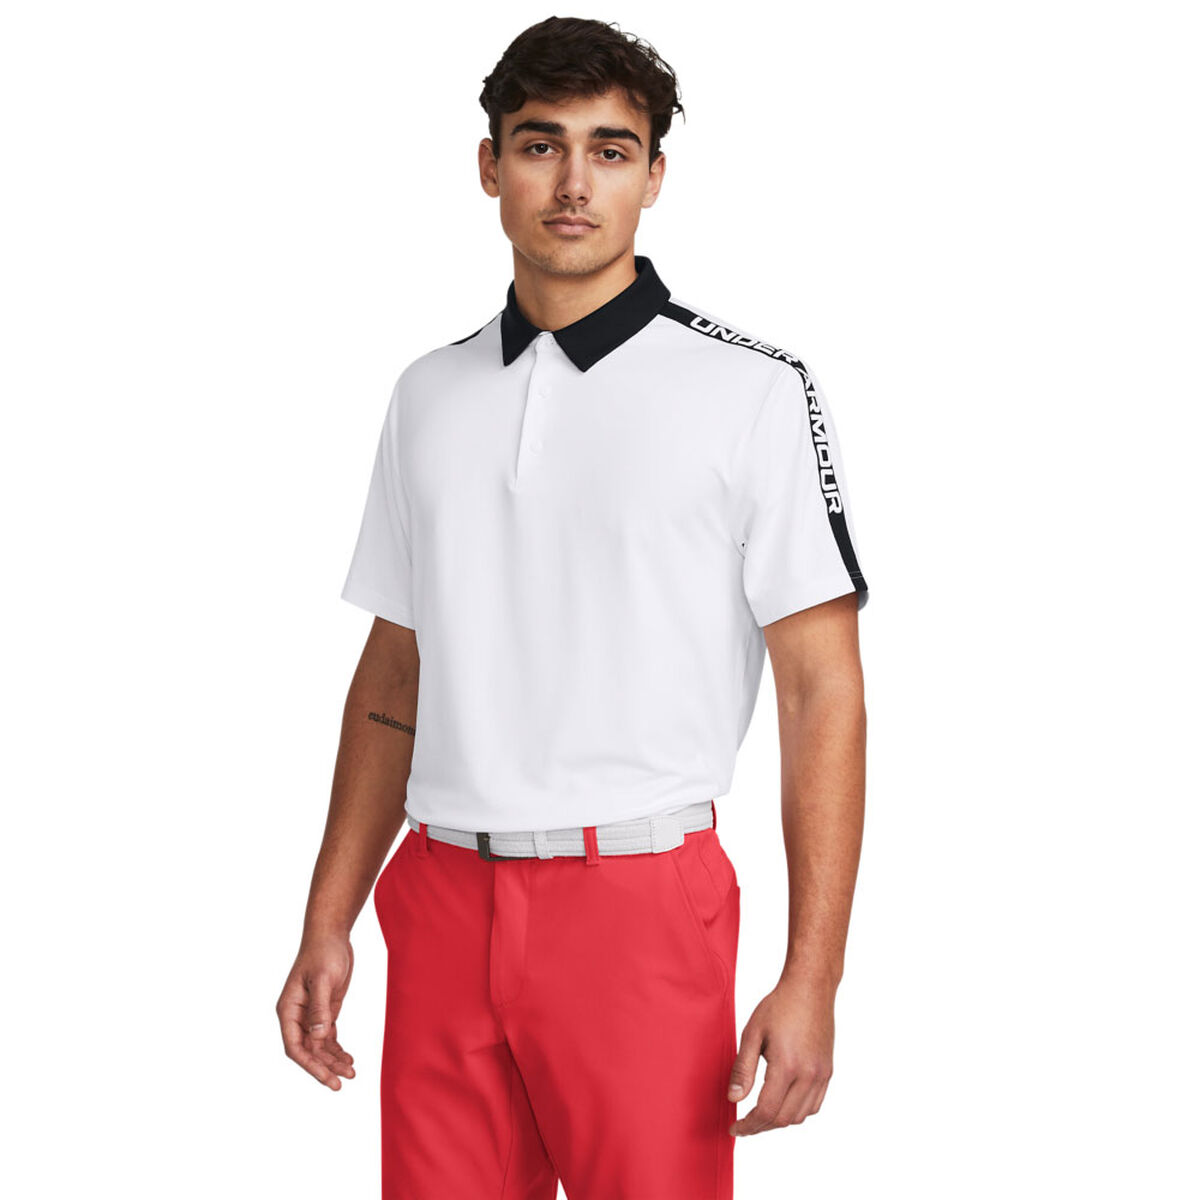 Under Armour Playoff 3.0 Striker Golf Polo Shirt, Mens, White, Large | American Golf